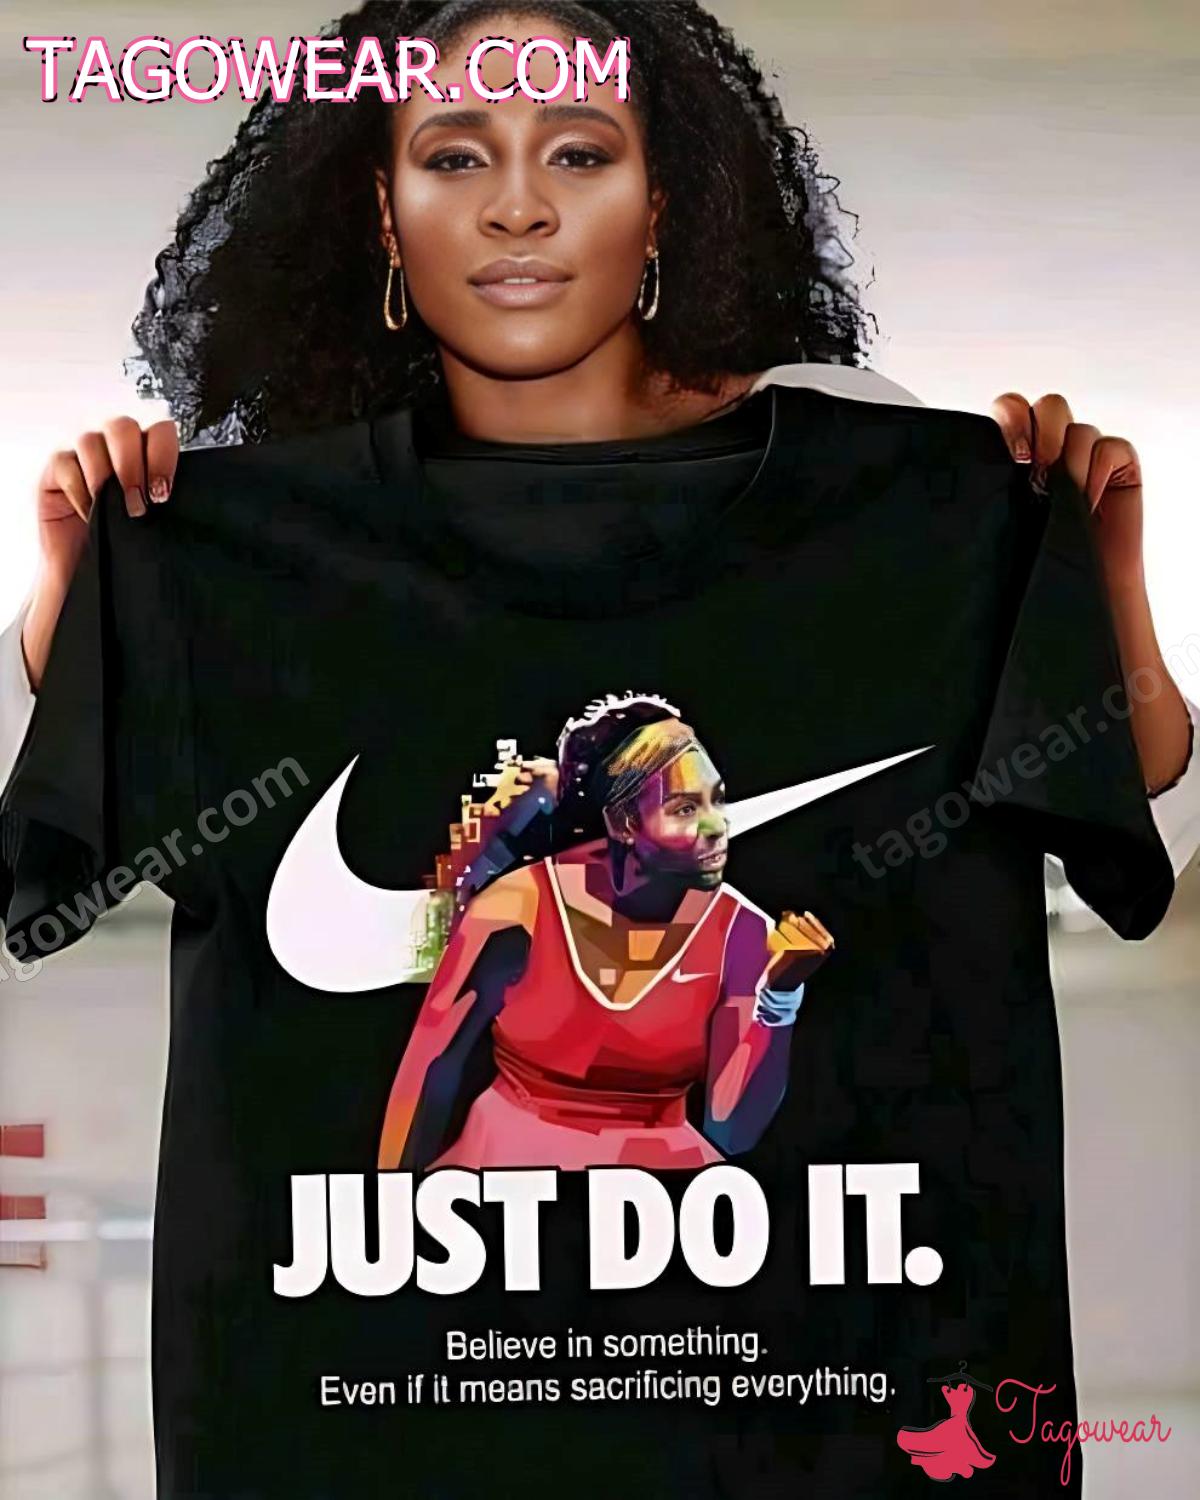 Serena Williams Just Do It Believe In Something Even If It Means Sacrificing Everything Shirt